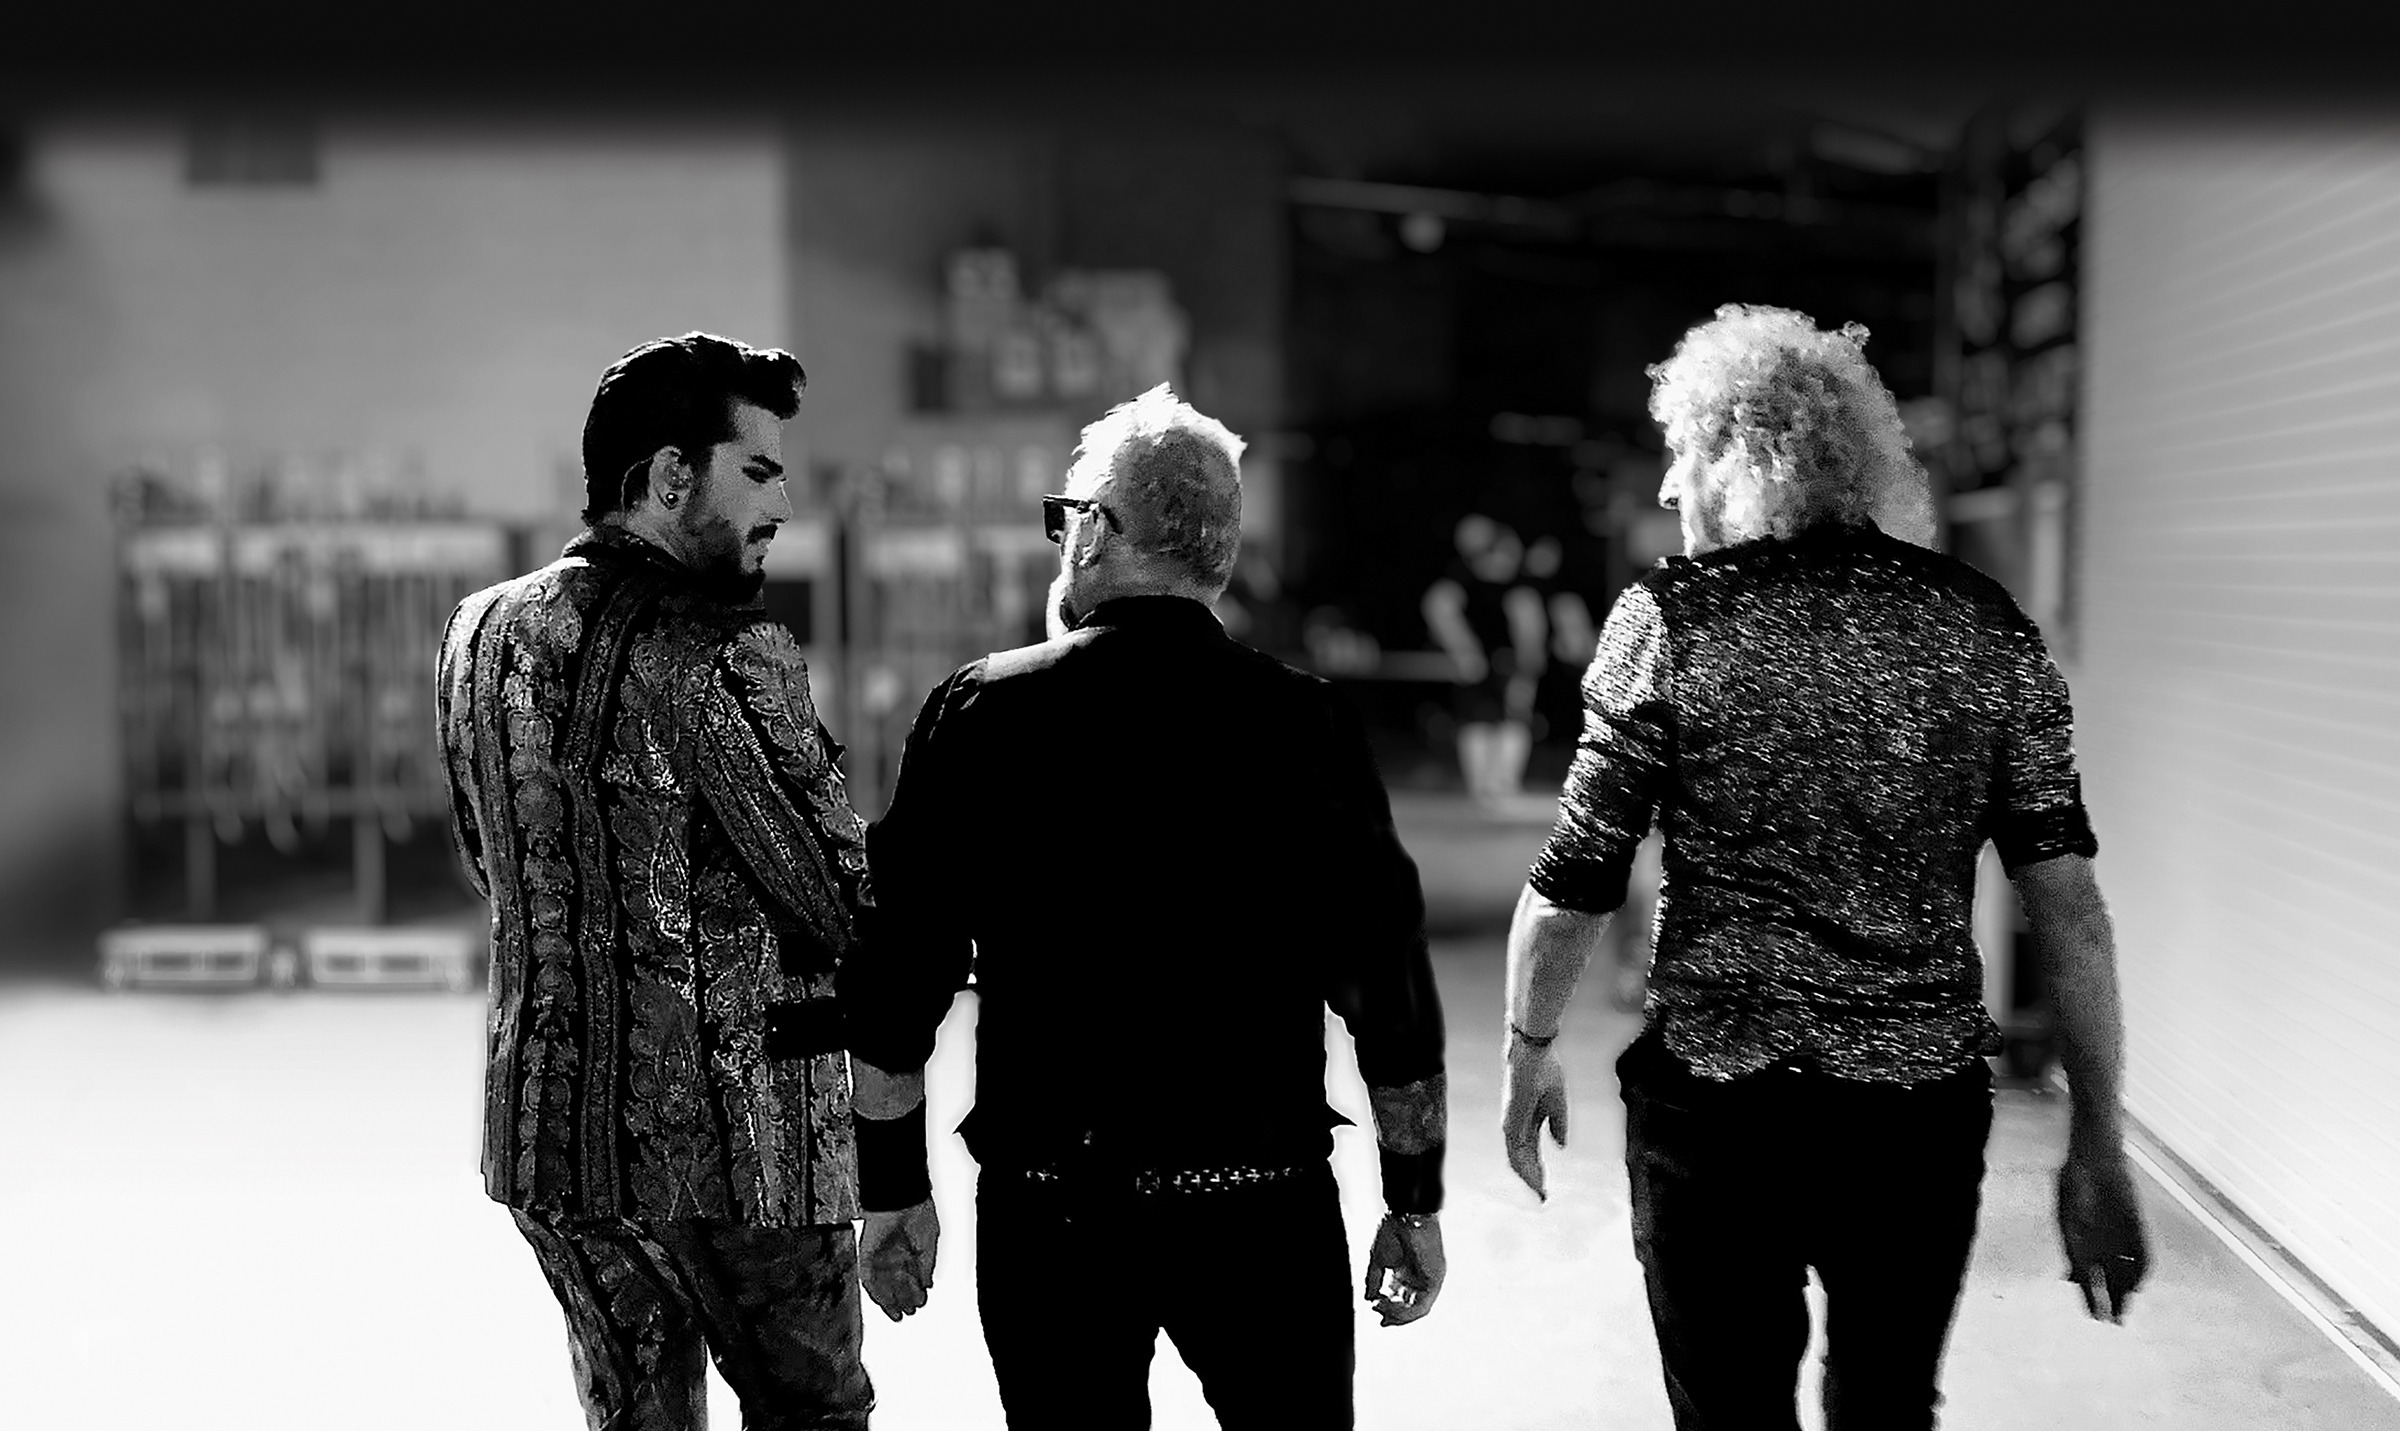 QUEEN + ADAM LAMBERT to release first LIVE album - Live Around The World on October 2nd 1